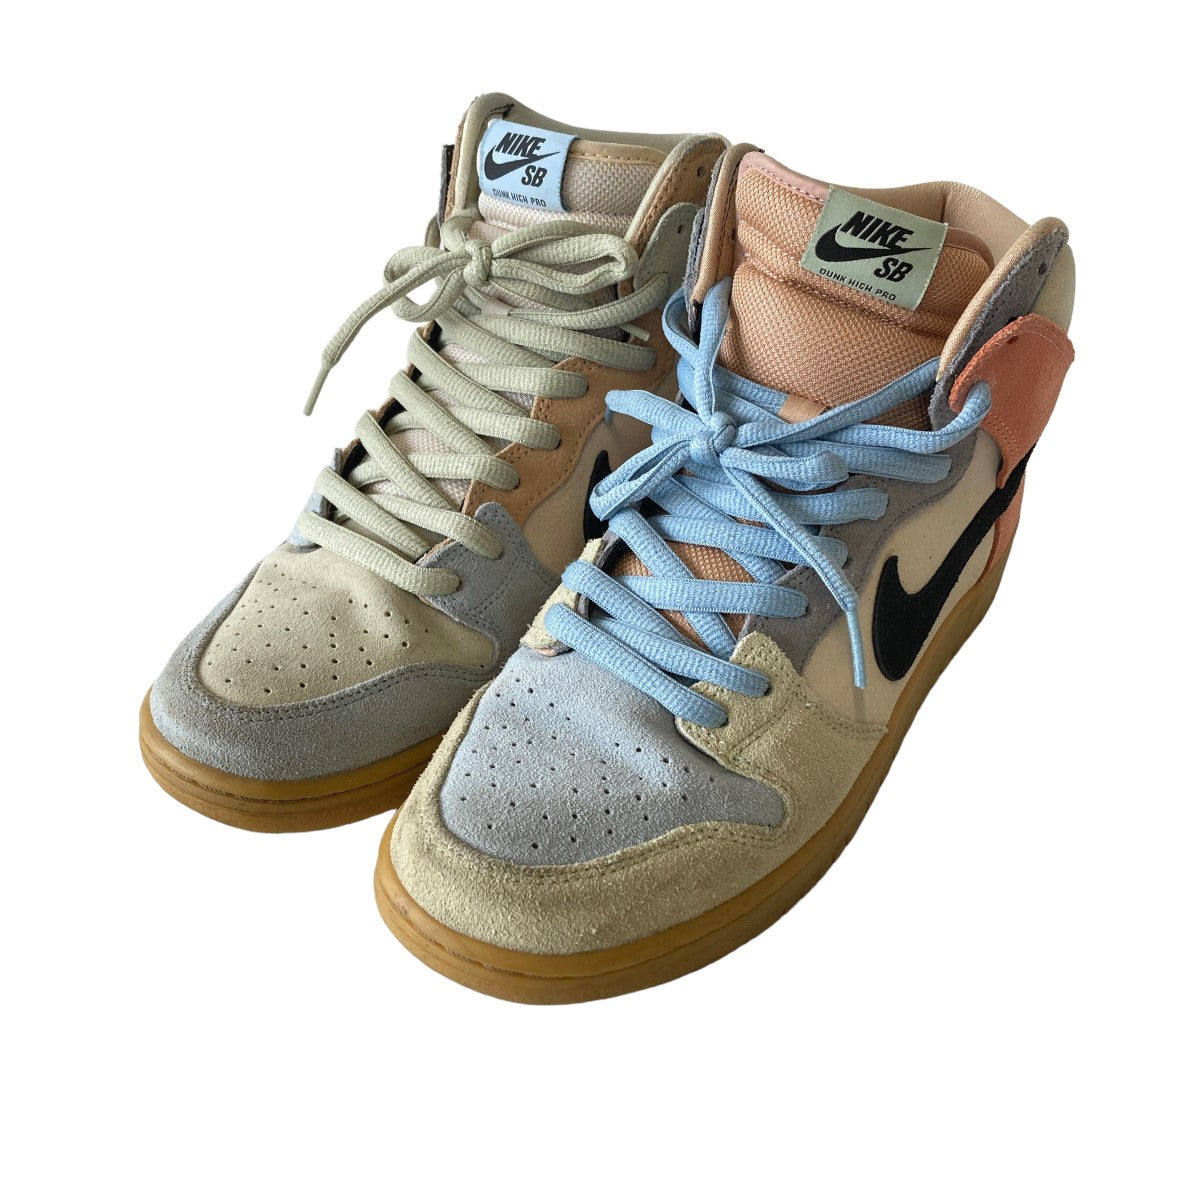 NIKE(ナイキ) SB DUNK HIGH PRO EASTER PARTICLE CN8345-001 マルチ ...